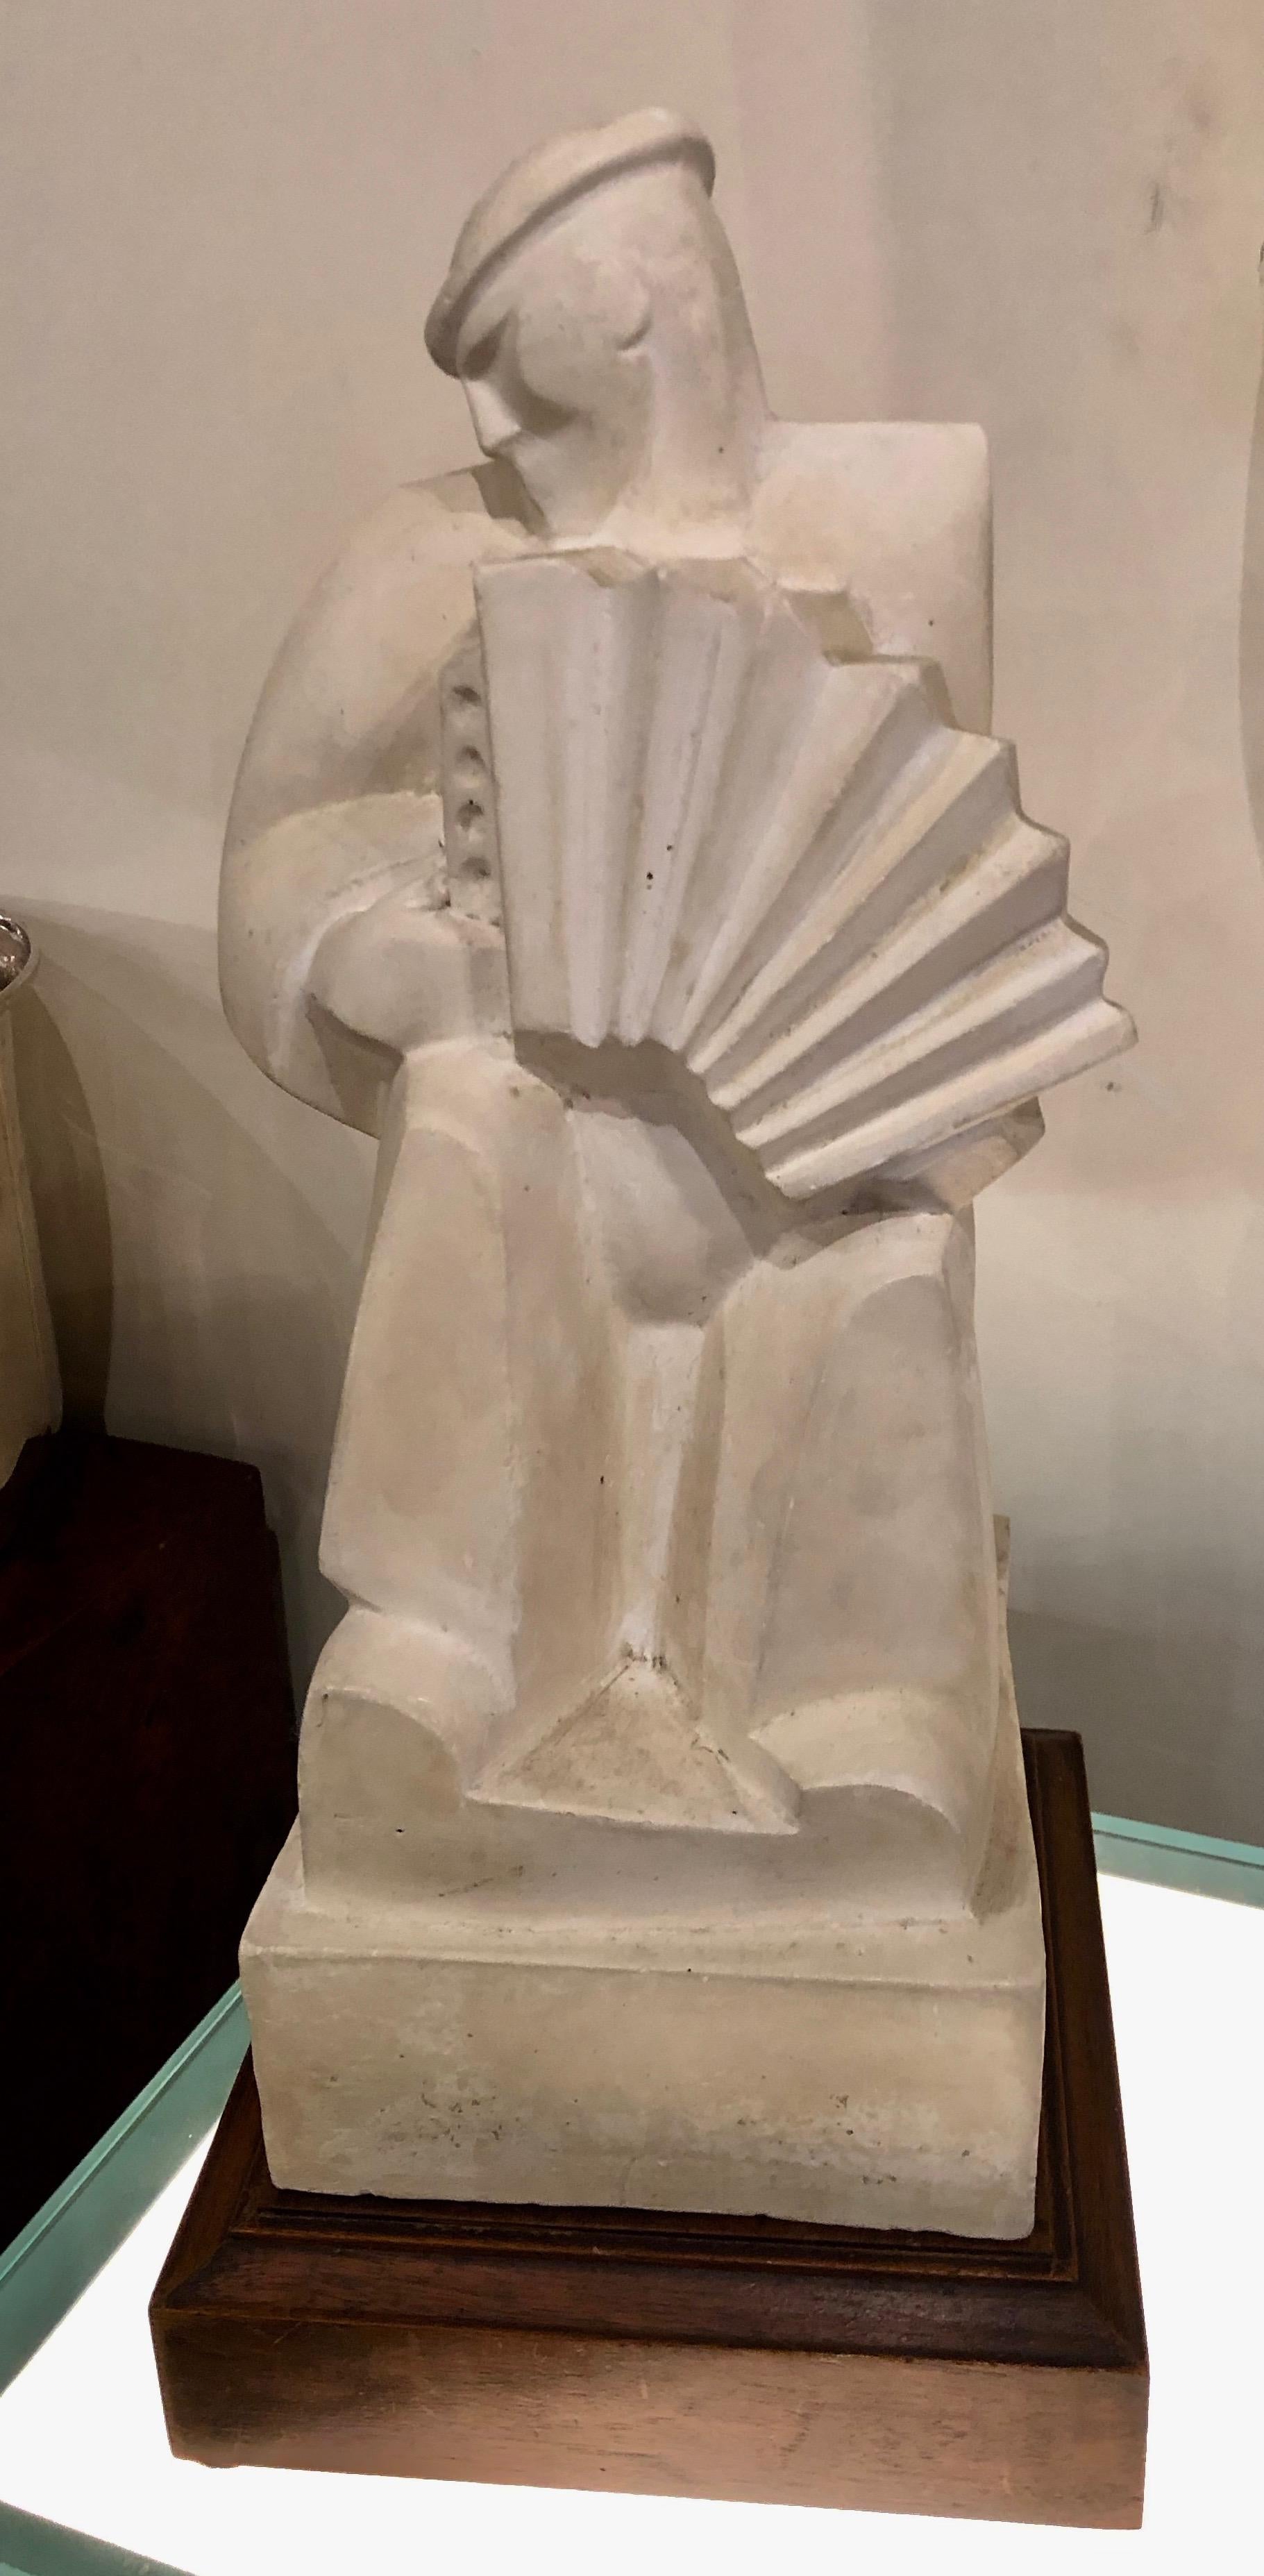 Jan and Joel Martel “L’Accordioniste” The Accordion Player. in cast stone sculpture with painted wood base France, circa 1925. One of the most important sculpture by these brothers, it was done it many different materials, bronze, wood, cast stone.